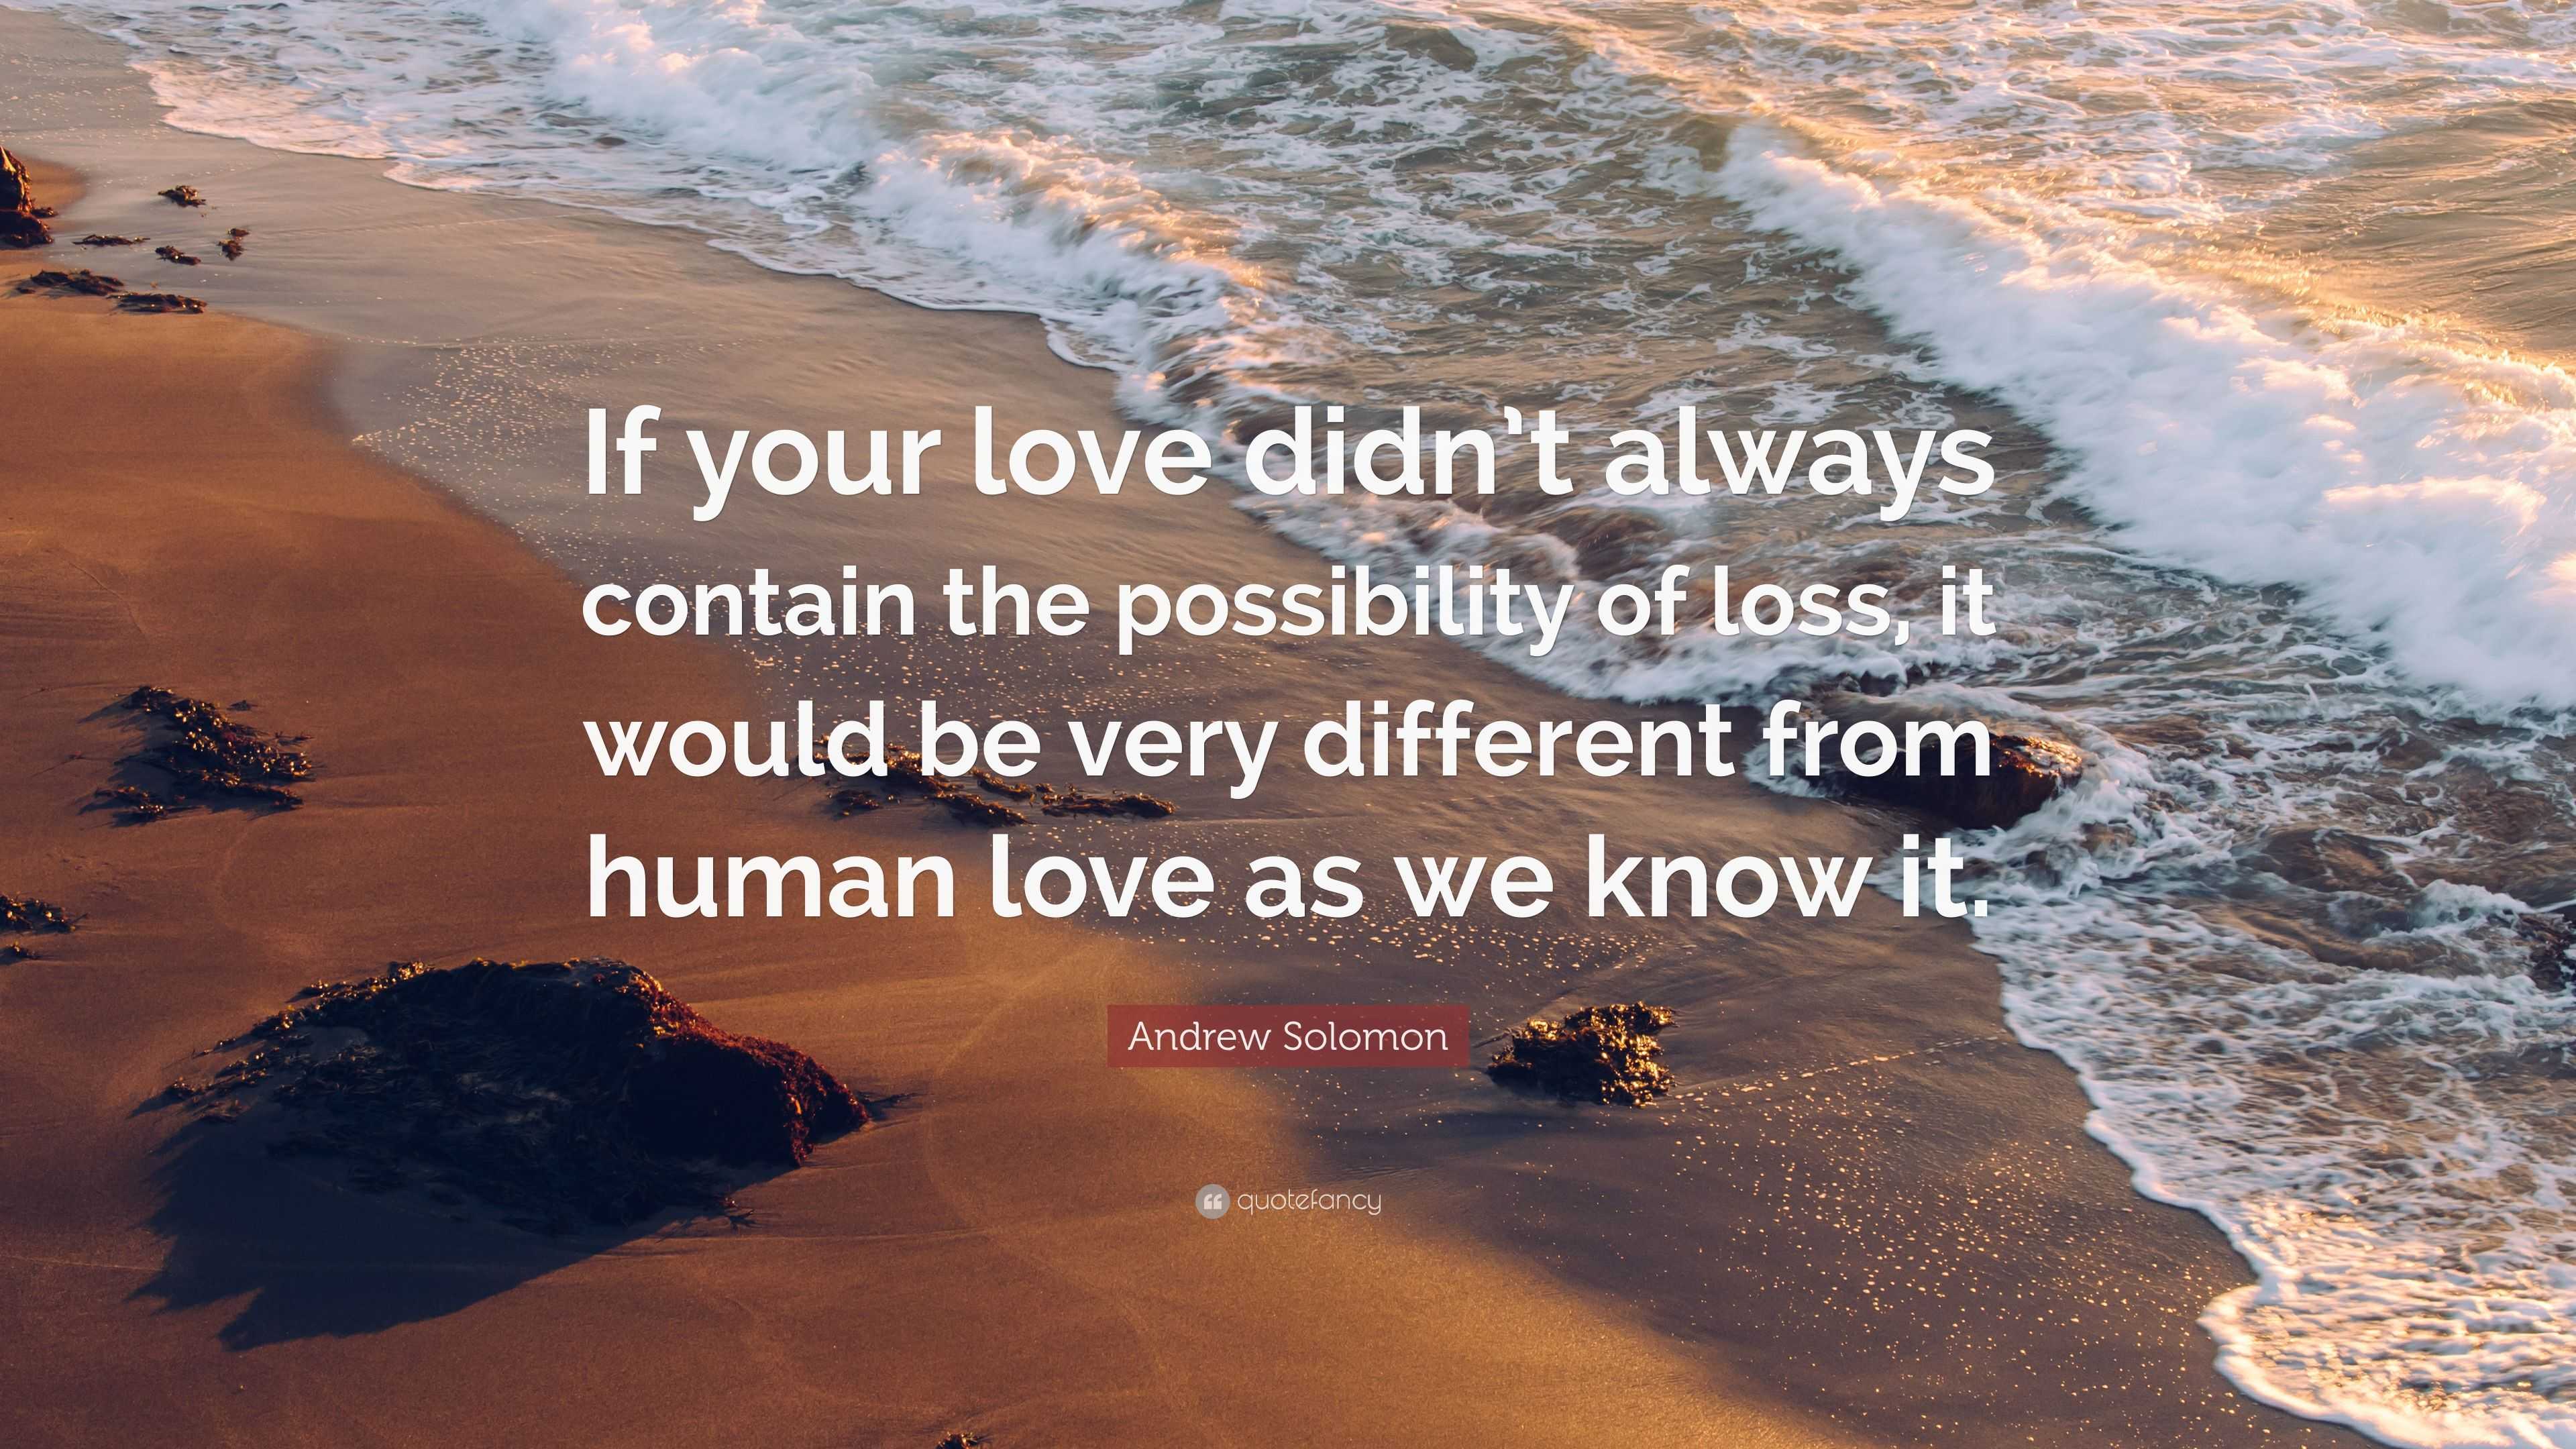 Andrew Solomon Quote: “If your love didn’t always contain the ...